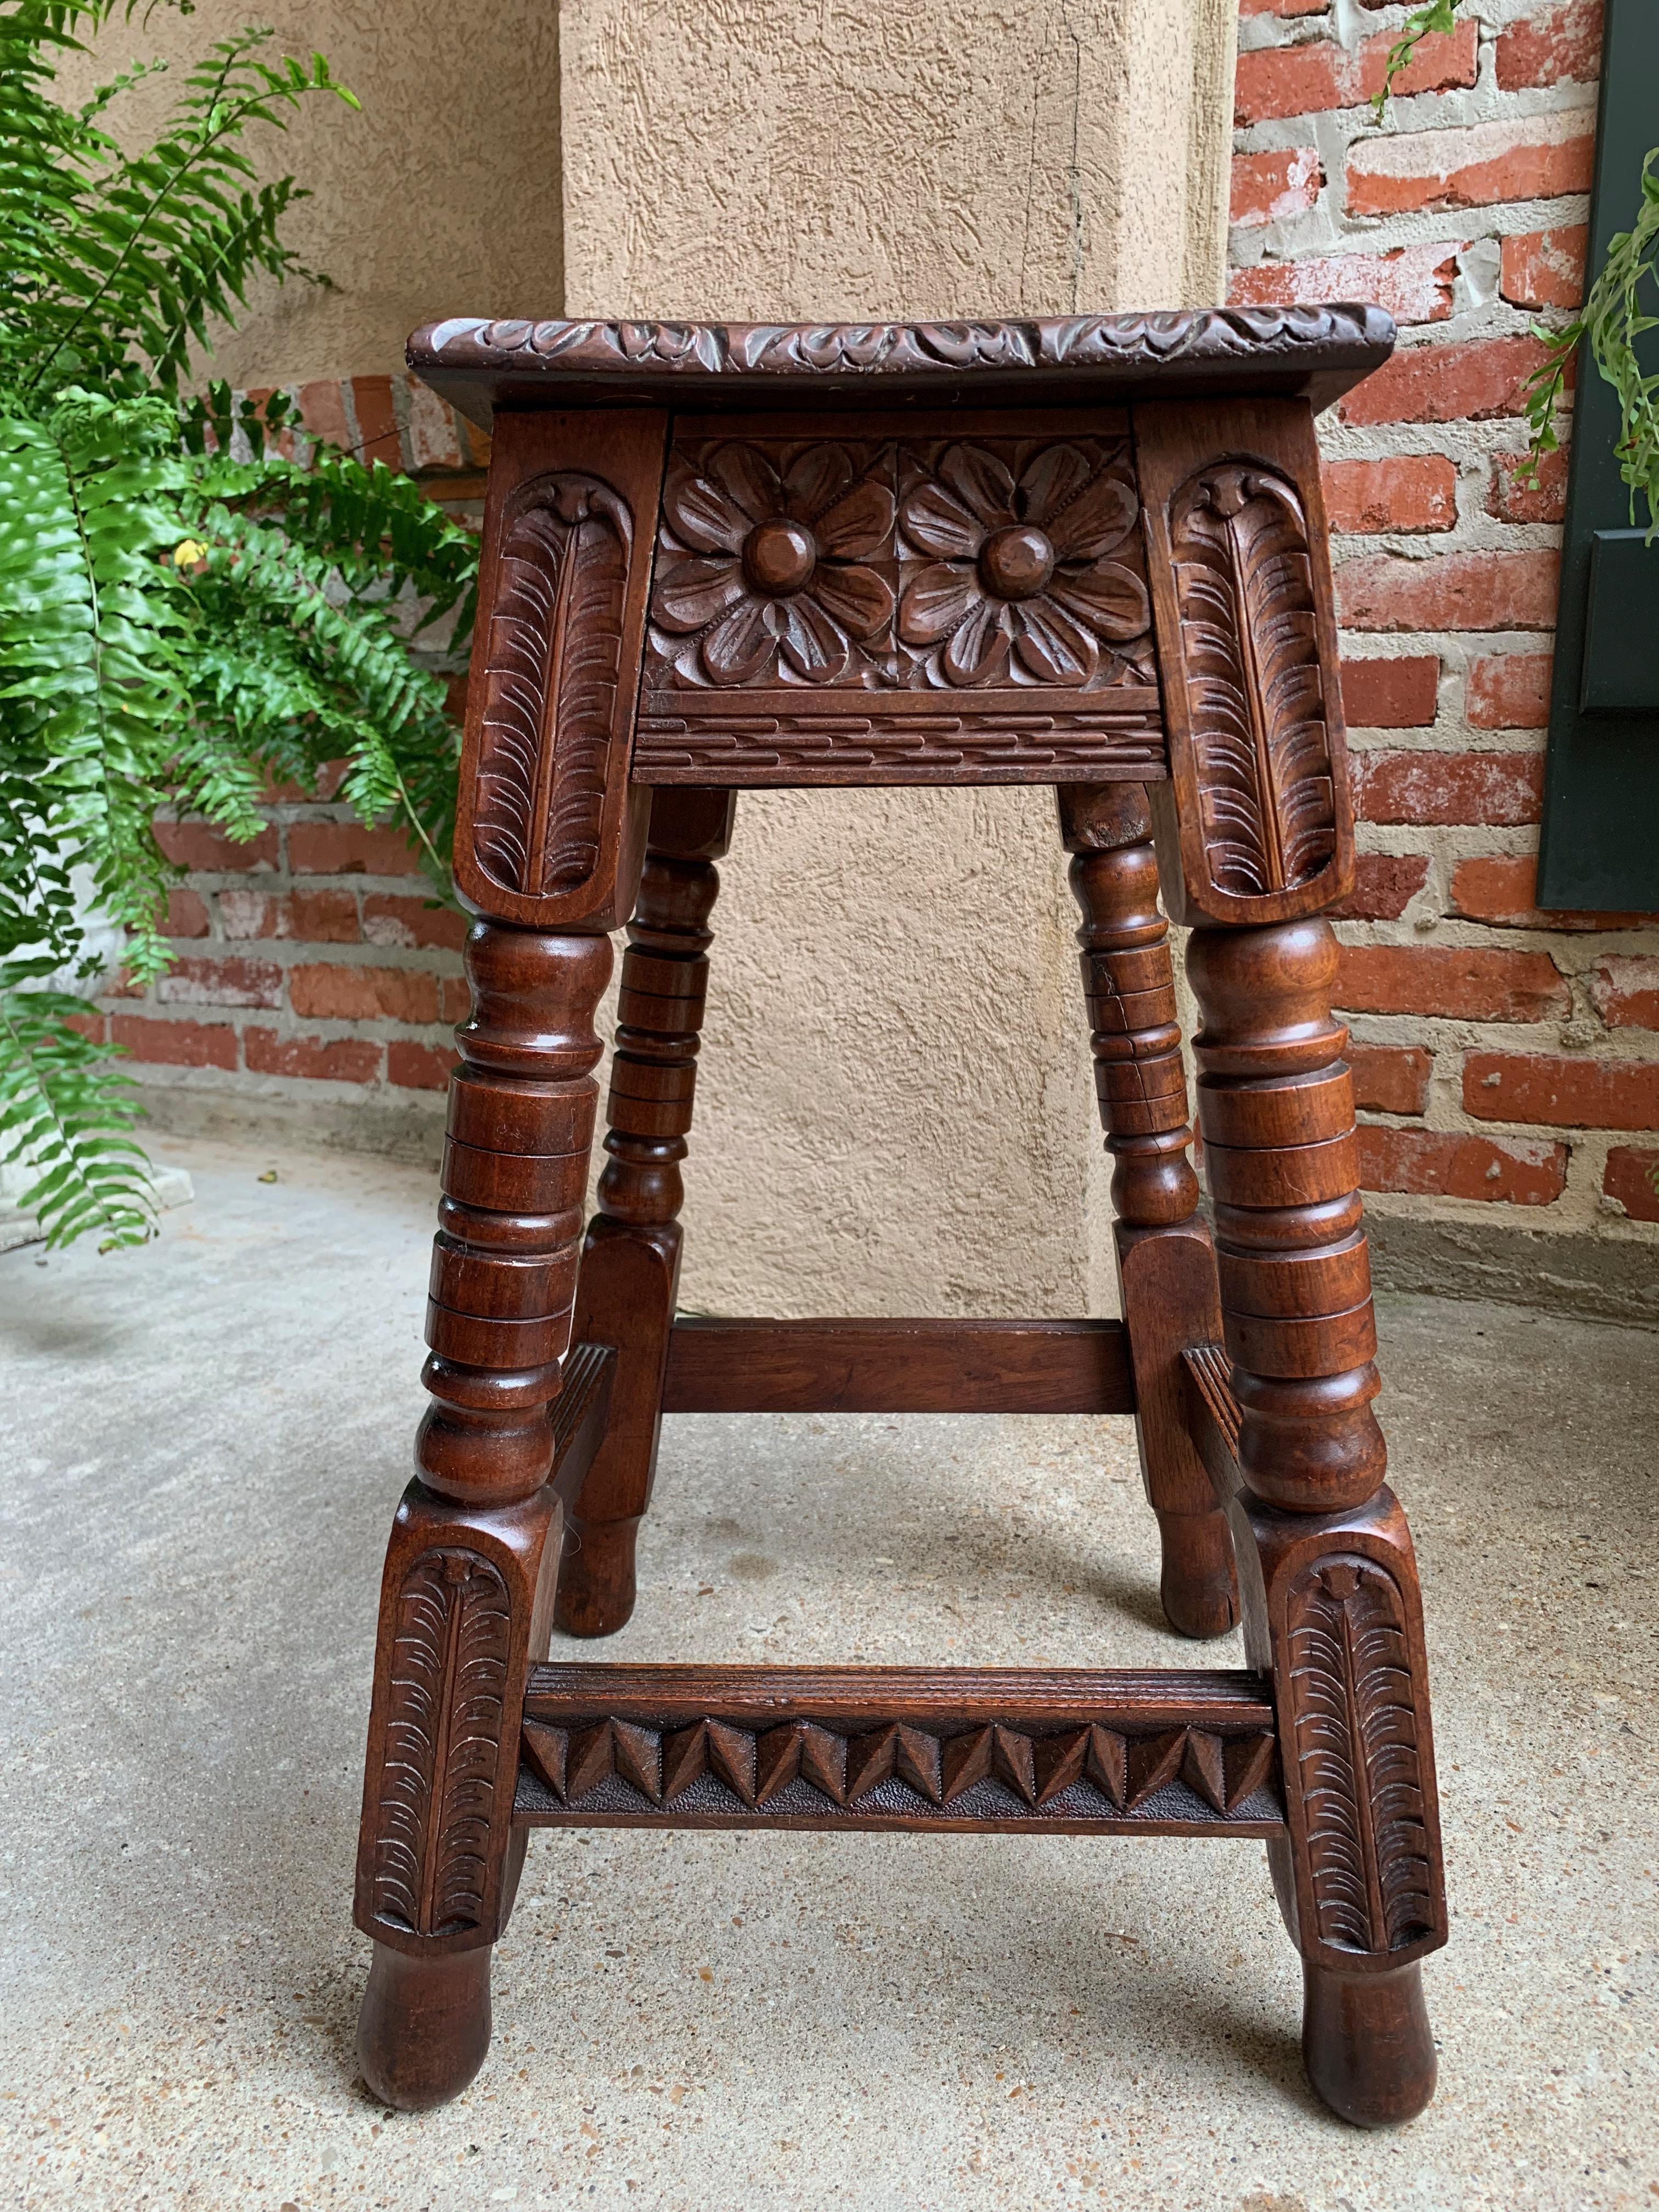 Early 20th Century Antique English Carved Oak Joint Stool Bench Table Lift Top Splayed Leg c1900